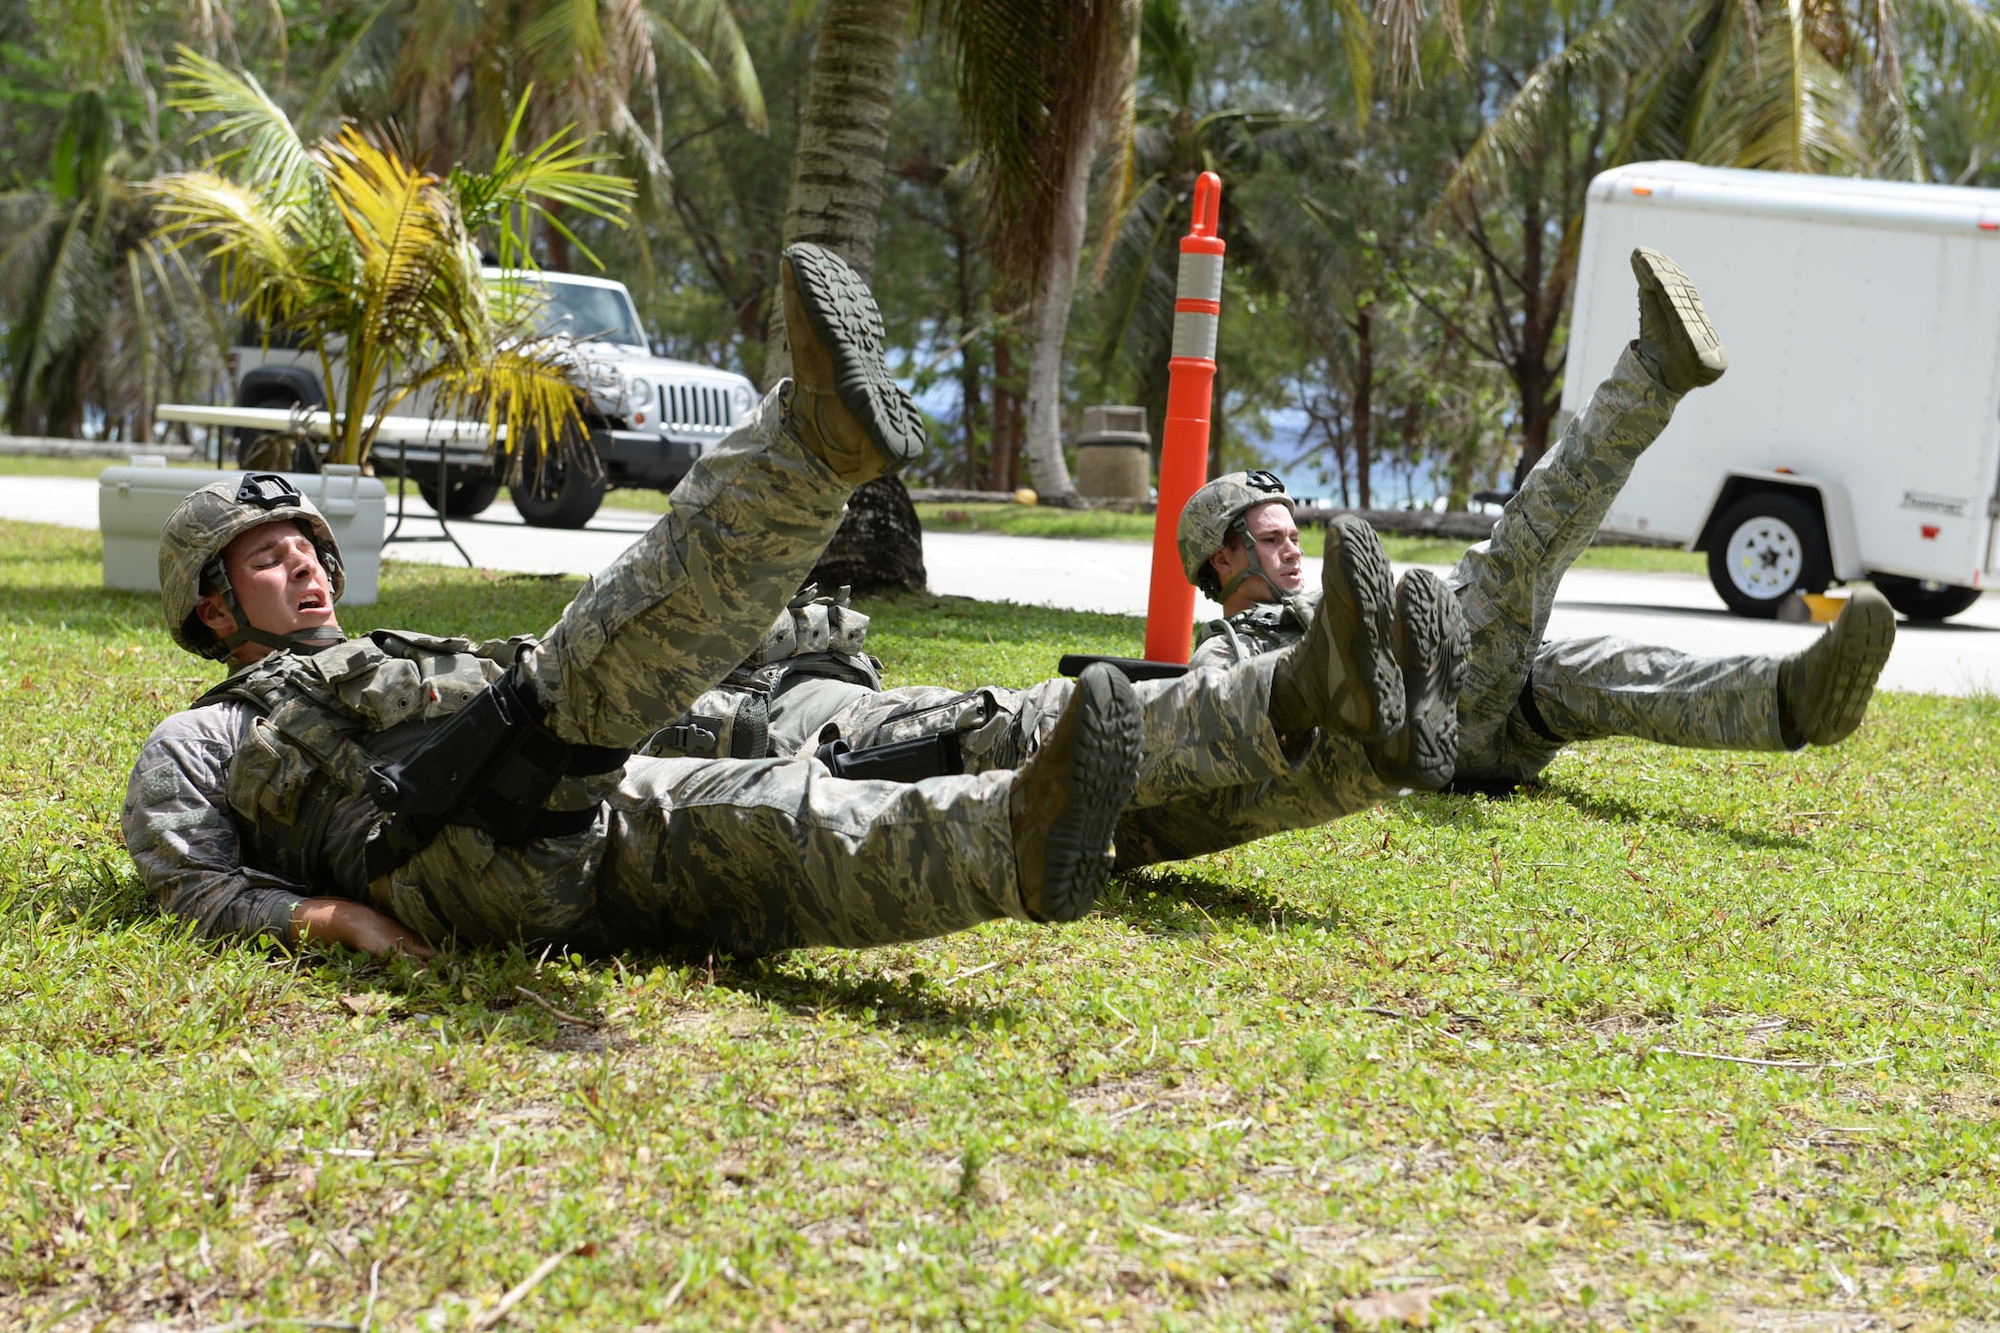 Airmen from the 36th Security Forces Squadron perform flutter kicks during the Defender Challenge June 22, 2015, at Andersen Air Force Base, Guam. Airmen tested their physical and mental strength through various obstacles and challenges during the competition, ending with a live-fire shooting course. (U.S. Air Force photo by Airman 1st Class Joshua Smoot/Released)